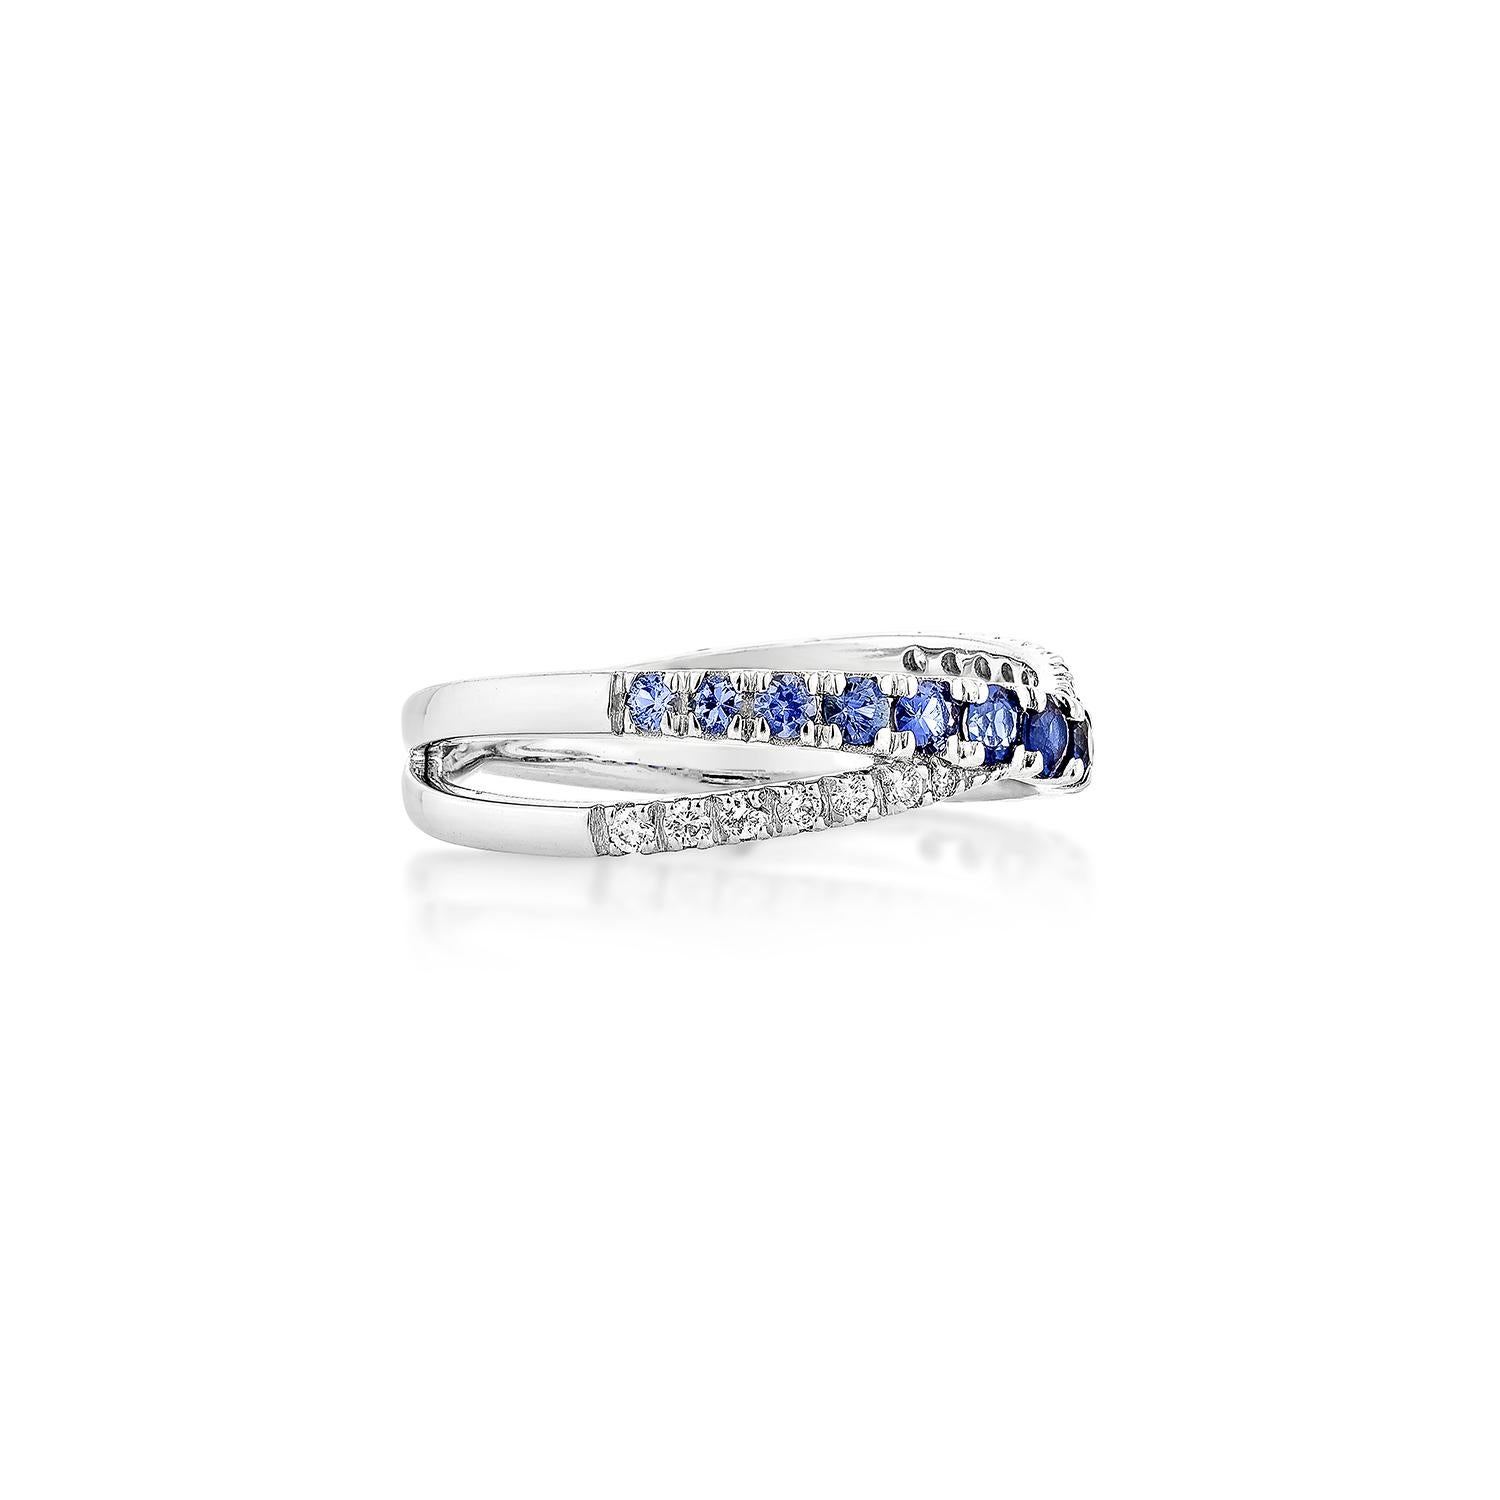 Contemporary 0.72 Carat Blue Sapphire Stackable Ring in 14Karat White Gold with Diamond.   For Sale